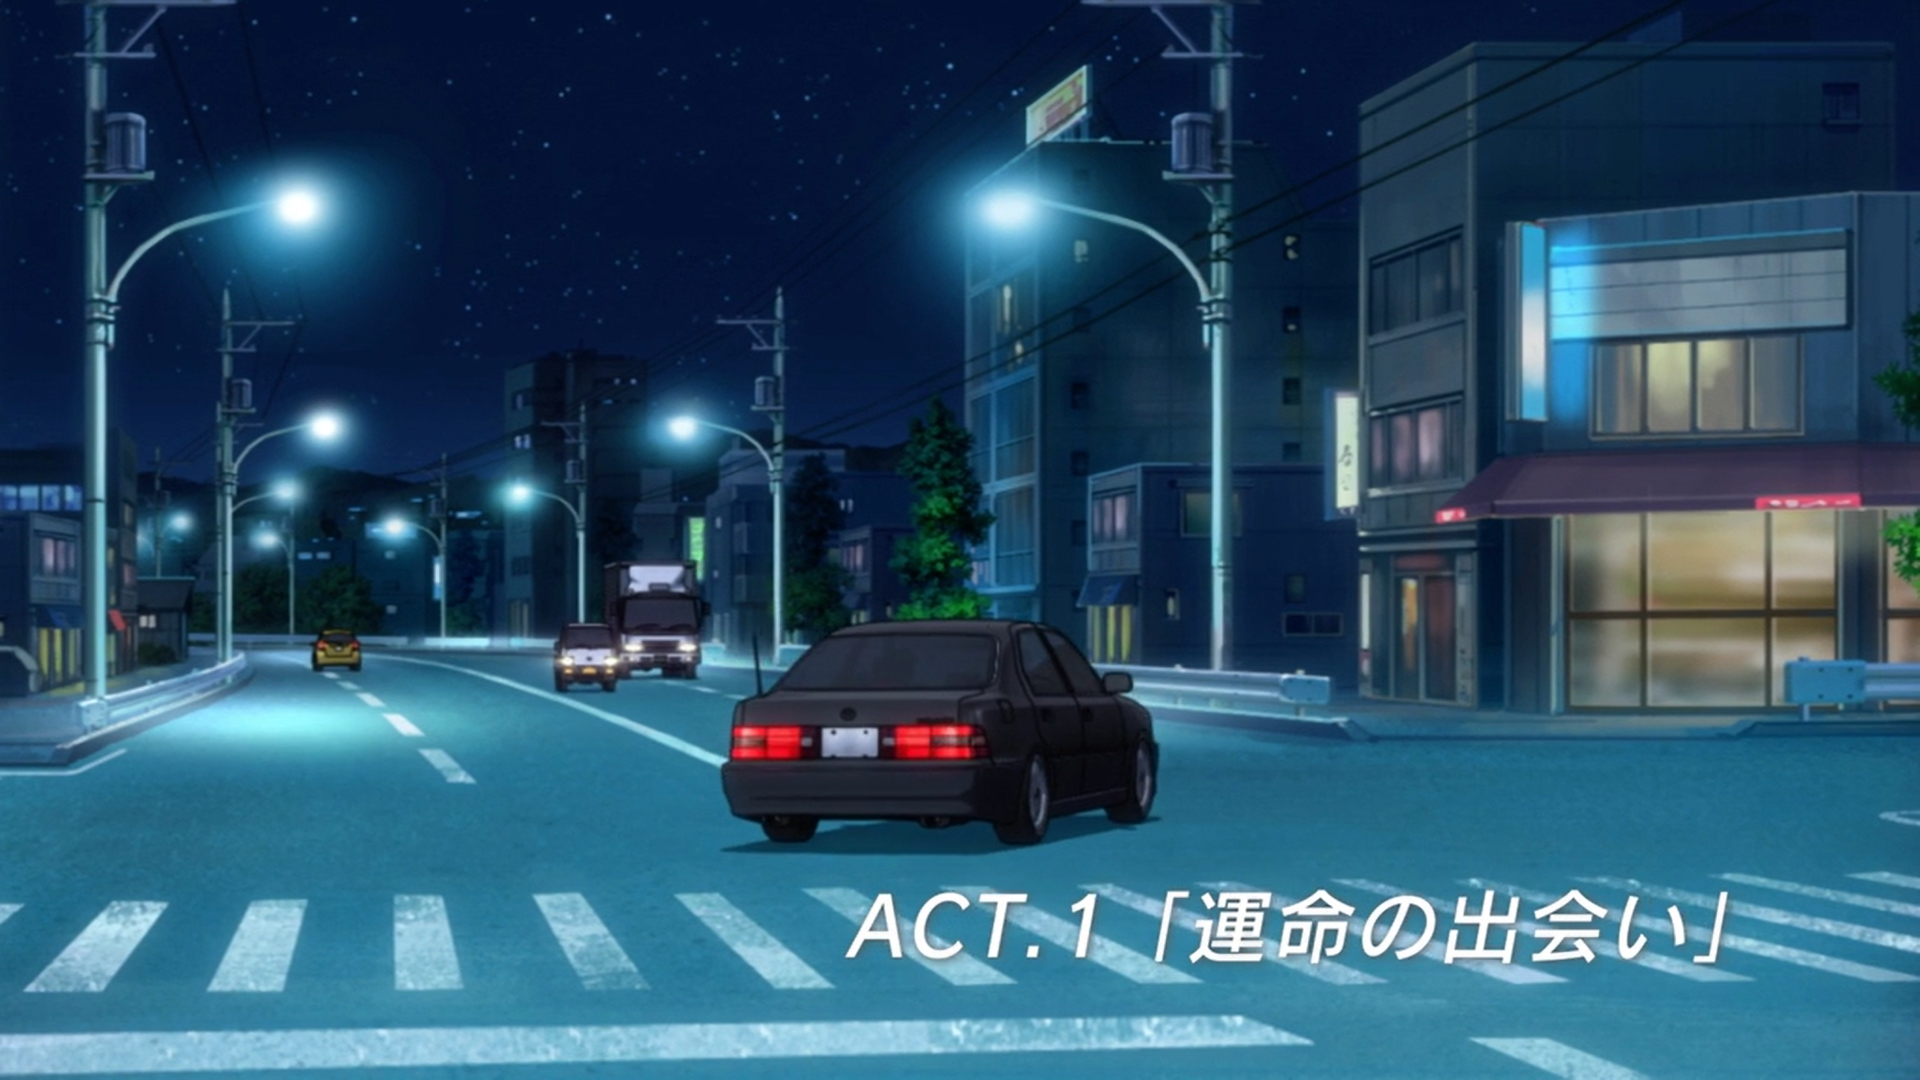 Initial D Fifth Stage Episódio 1 - Animes Online